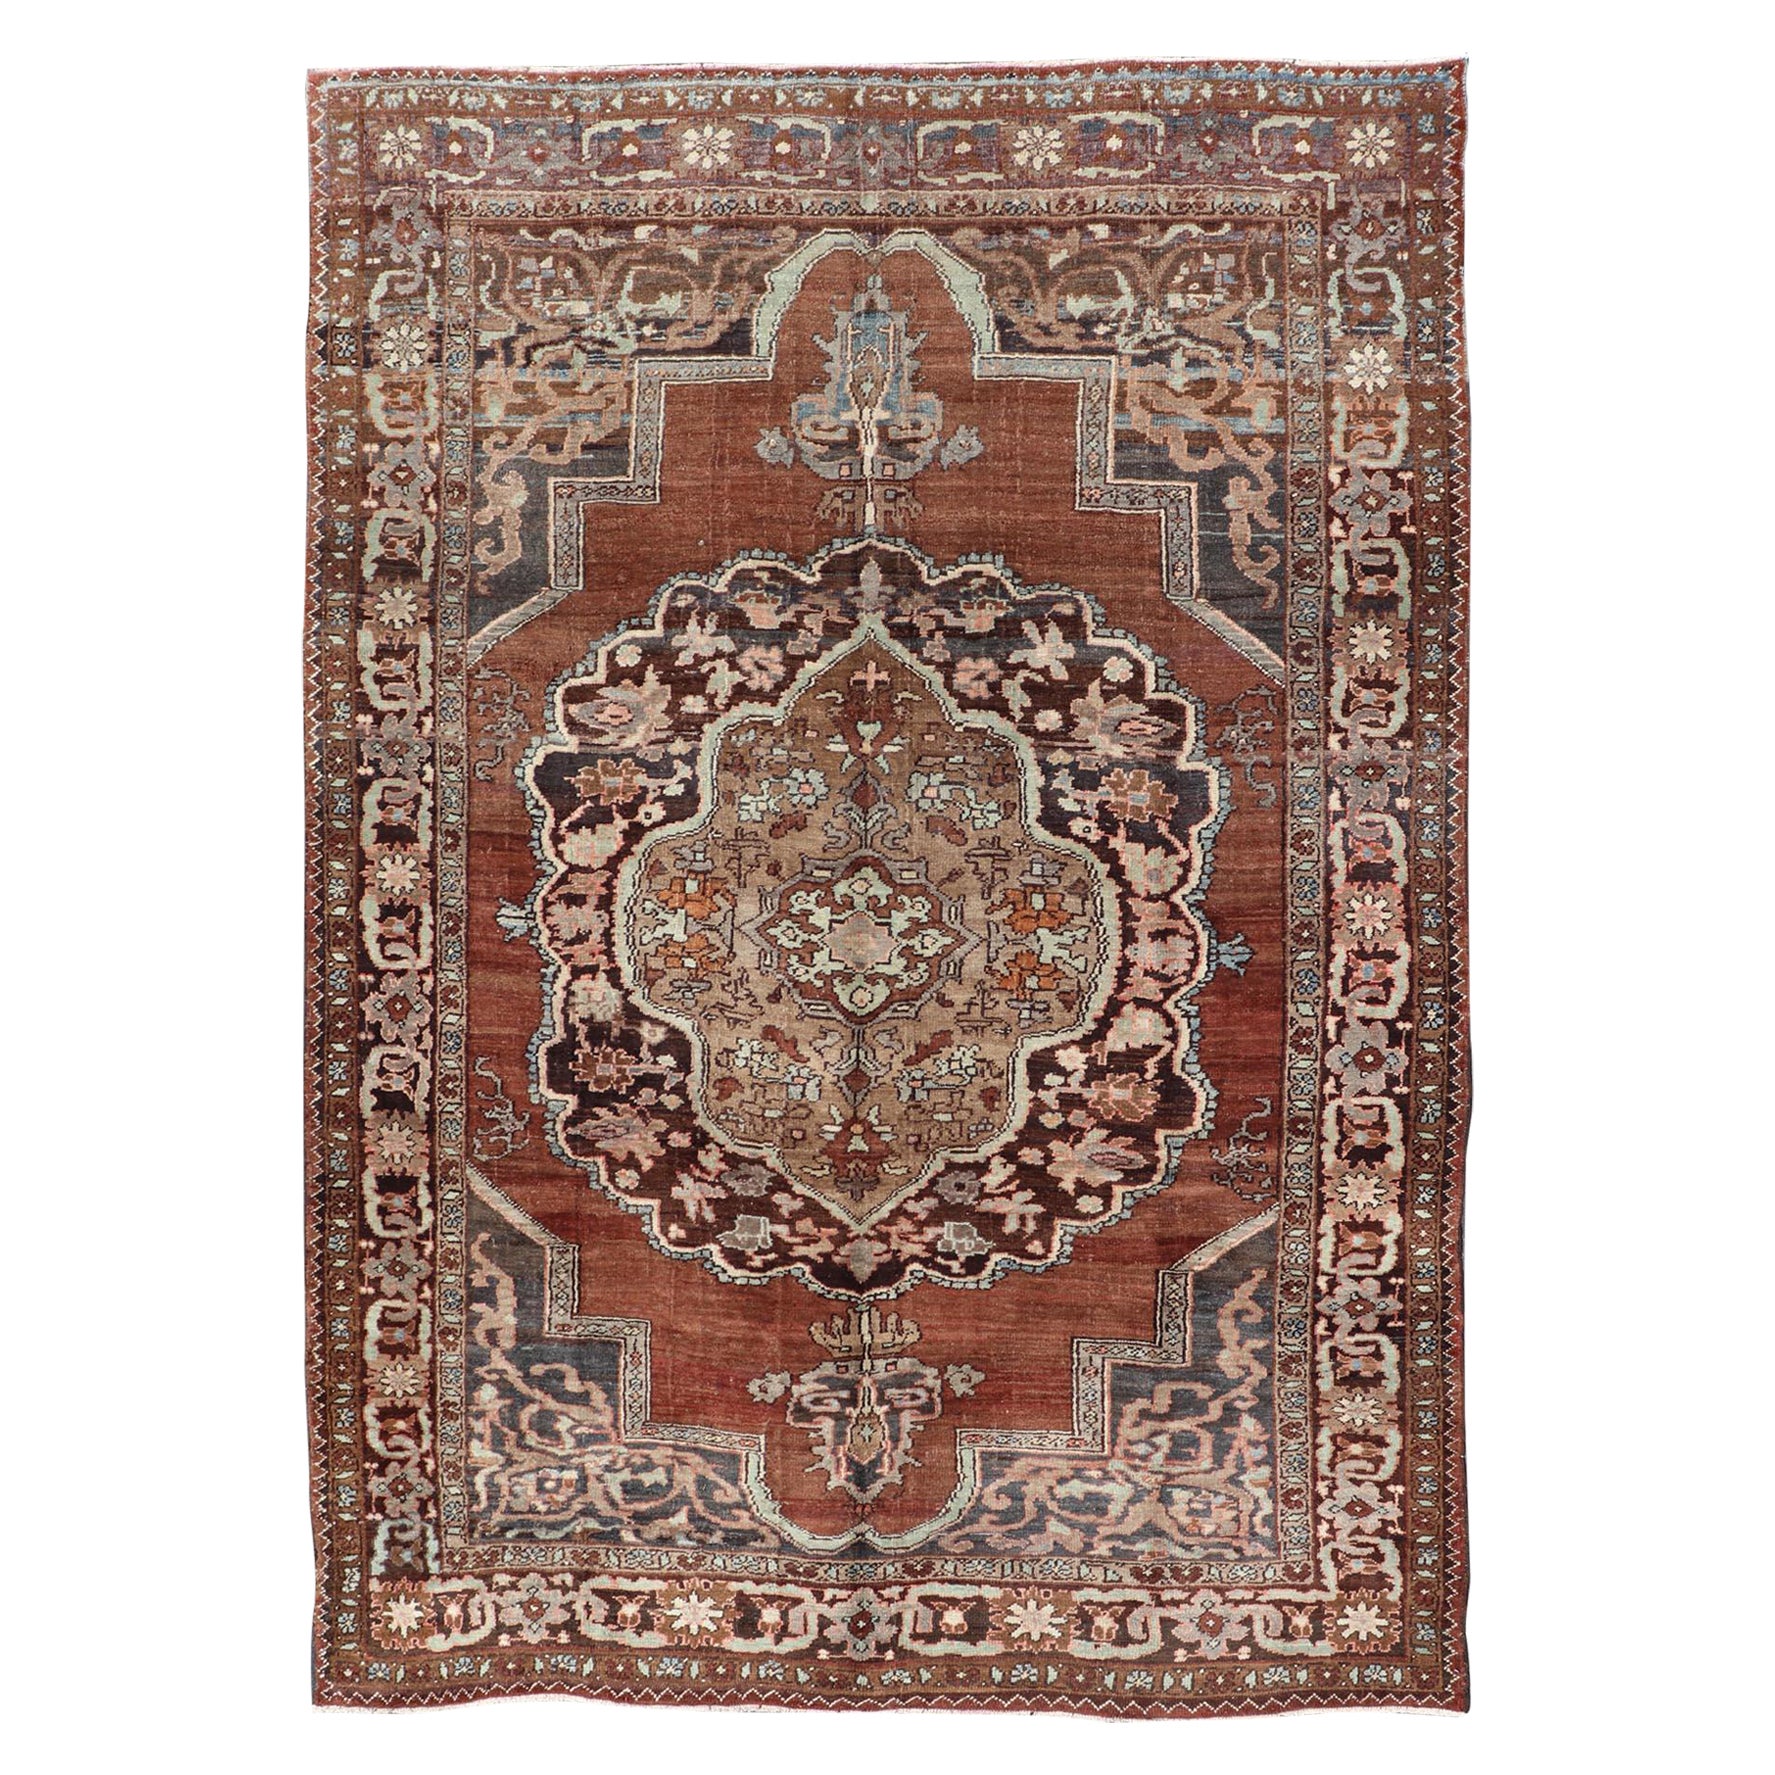 Turkish Kars Rug with Floral Medallion Design in Brown and Earthy Tones 